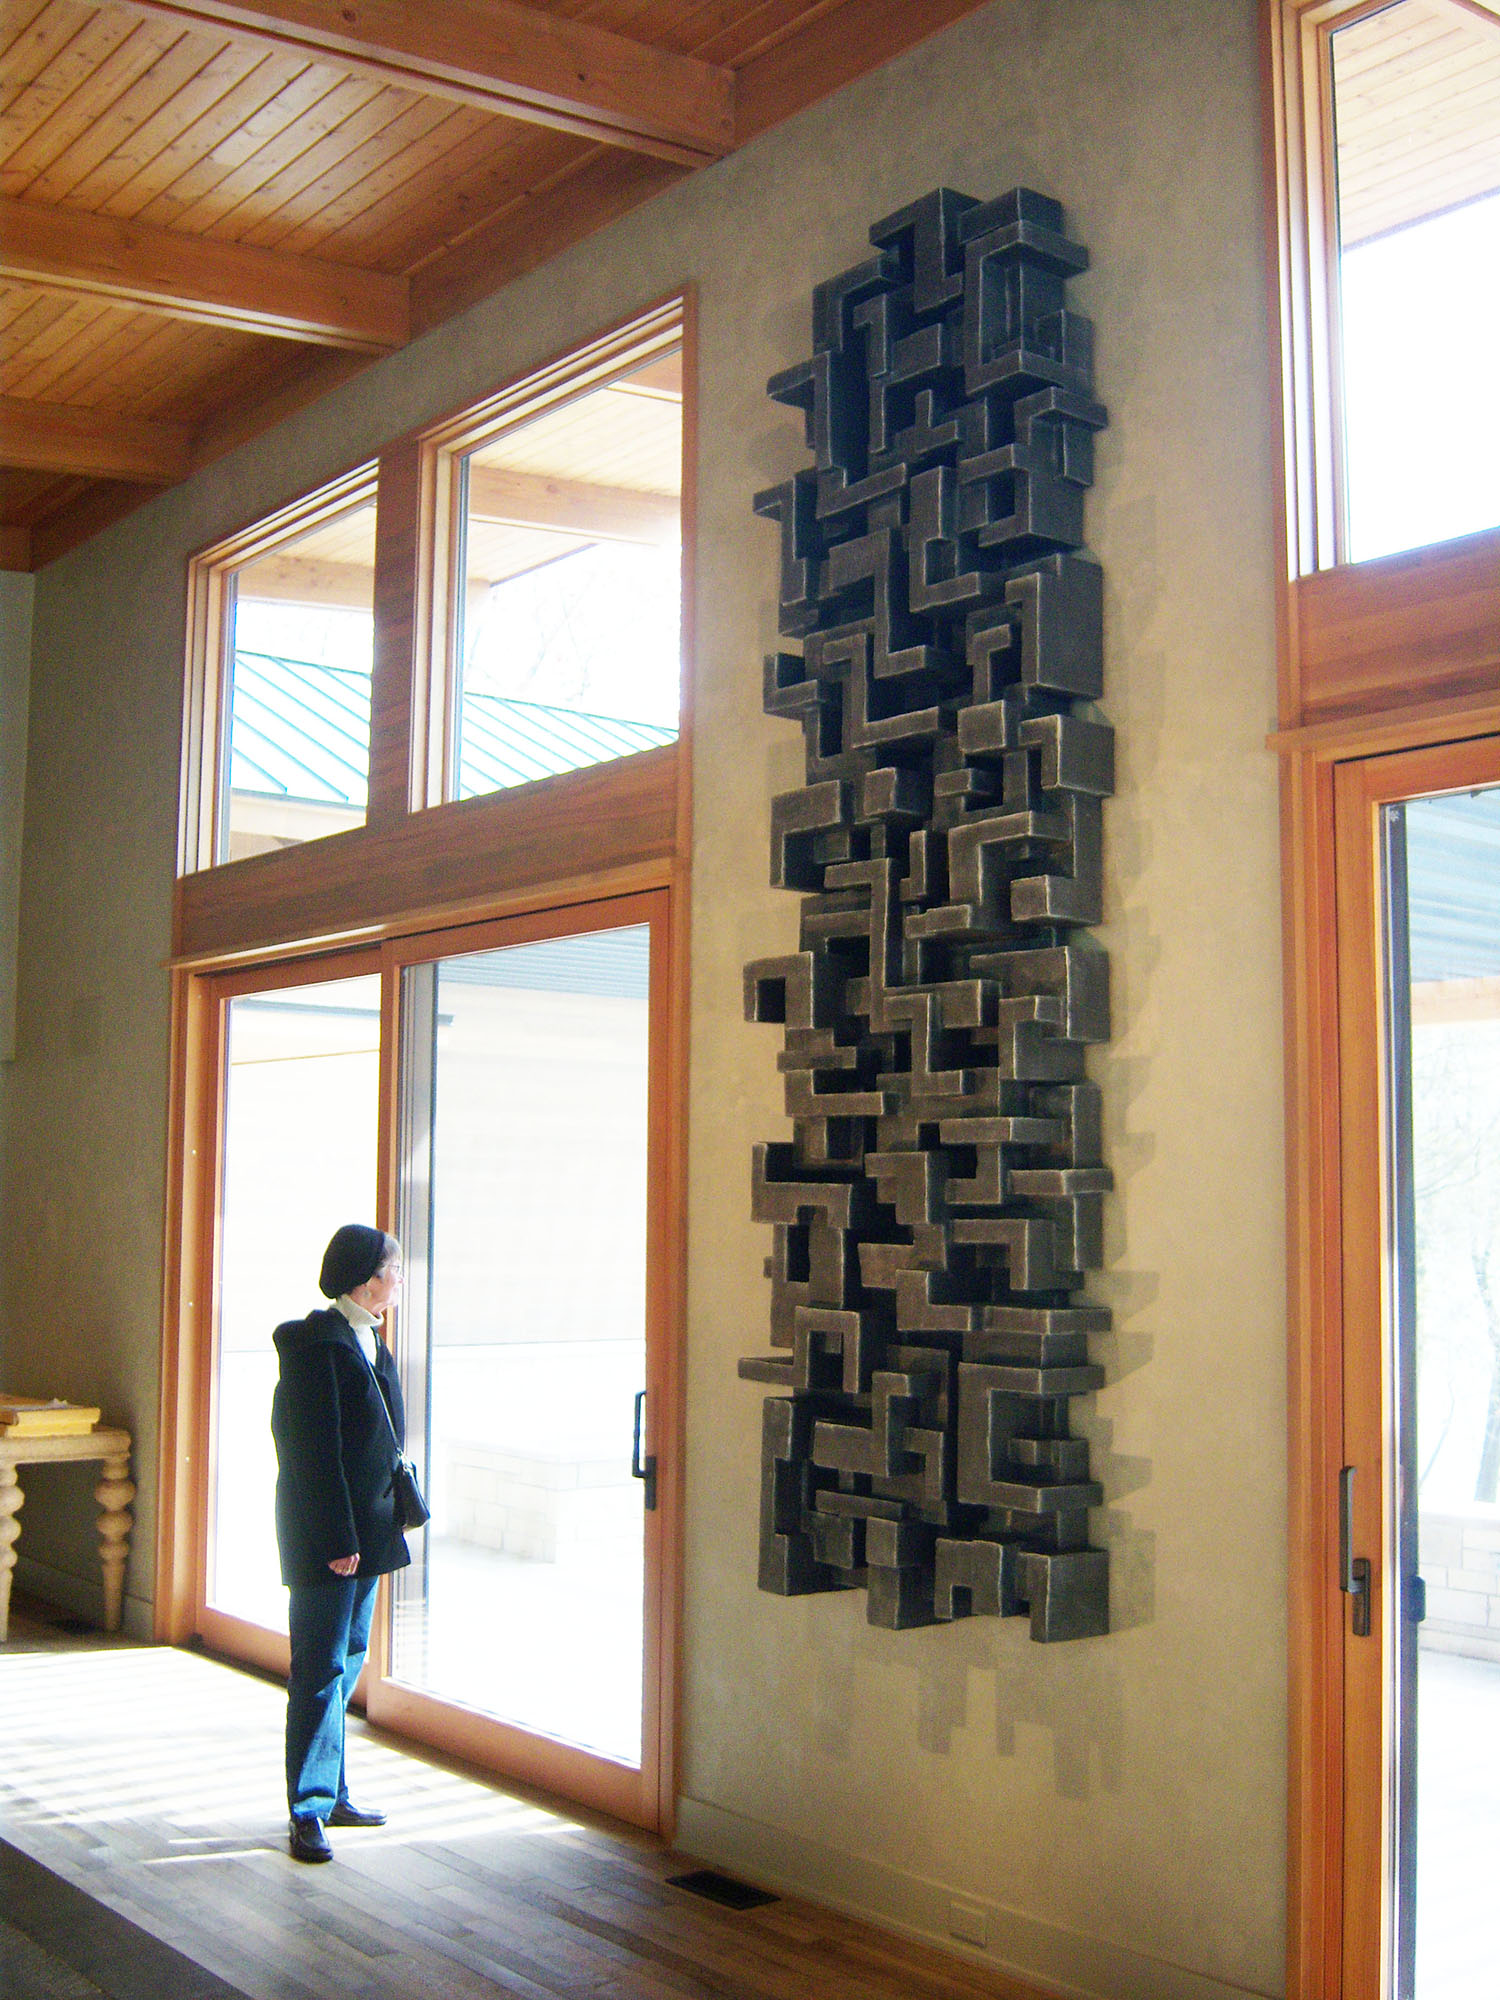 TOTEM, commission for private residence, near Chicago